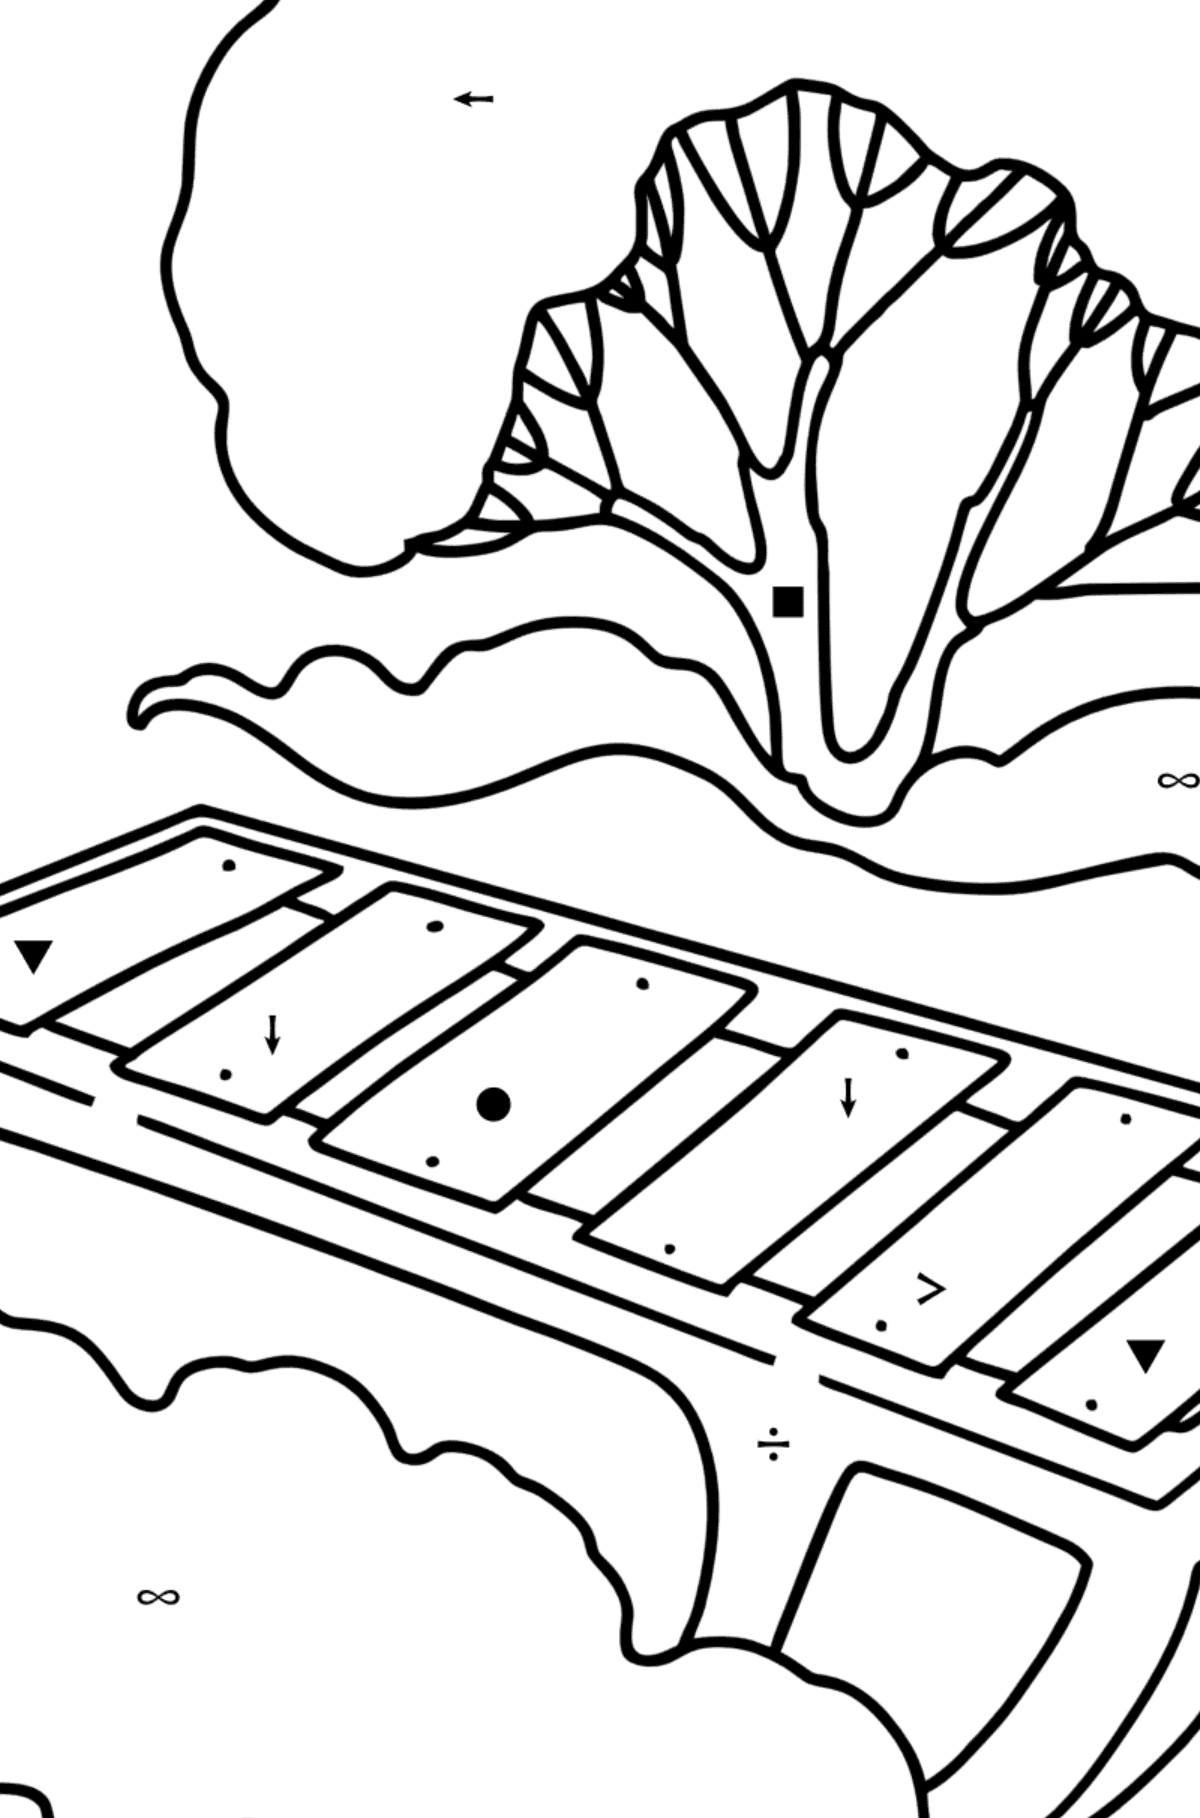 Coloring page - Sled for Kids - Coloring by Symbols for Kids